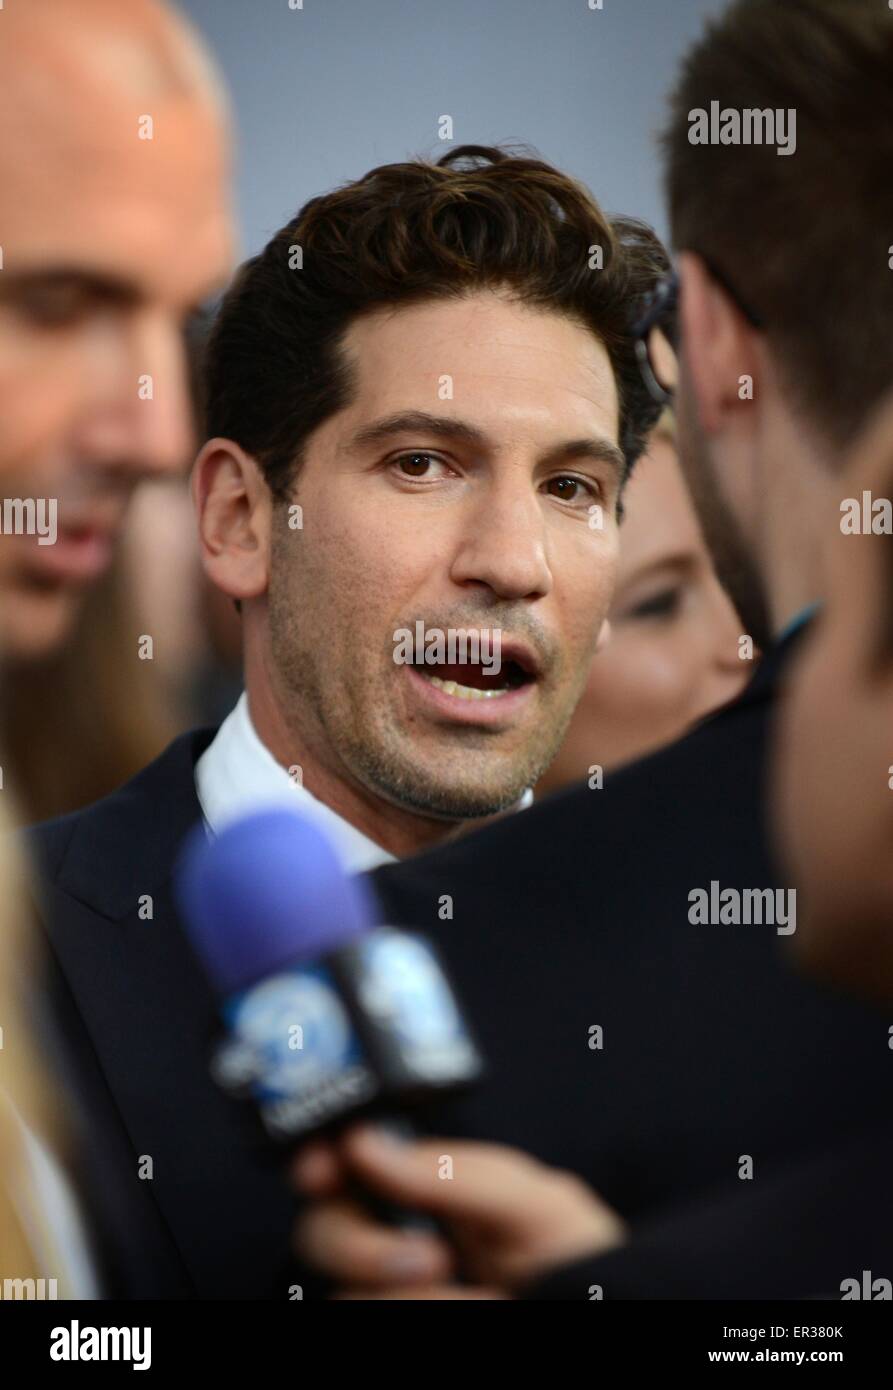 Actor Jon Bernthal at the premier of the blockbuster movie Fury at the Newseum October 21, 2014 in Washington D.C. Stock Photo